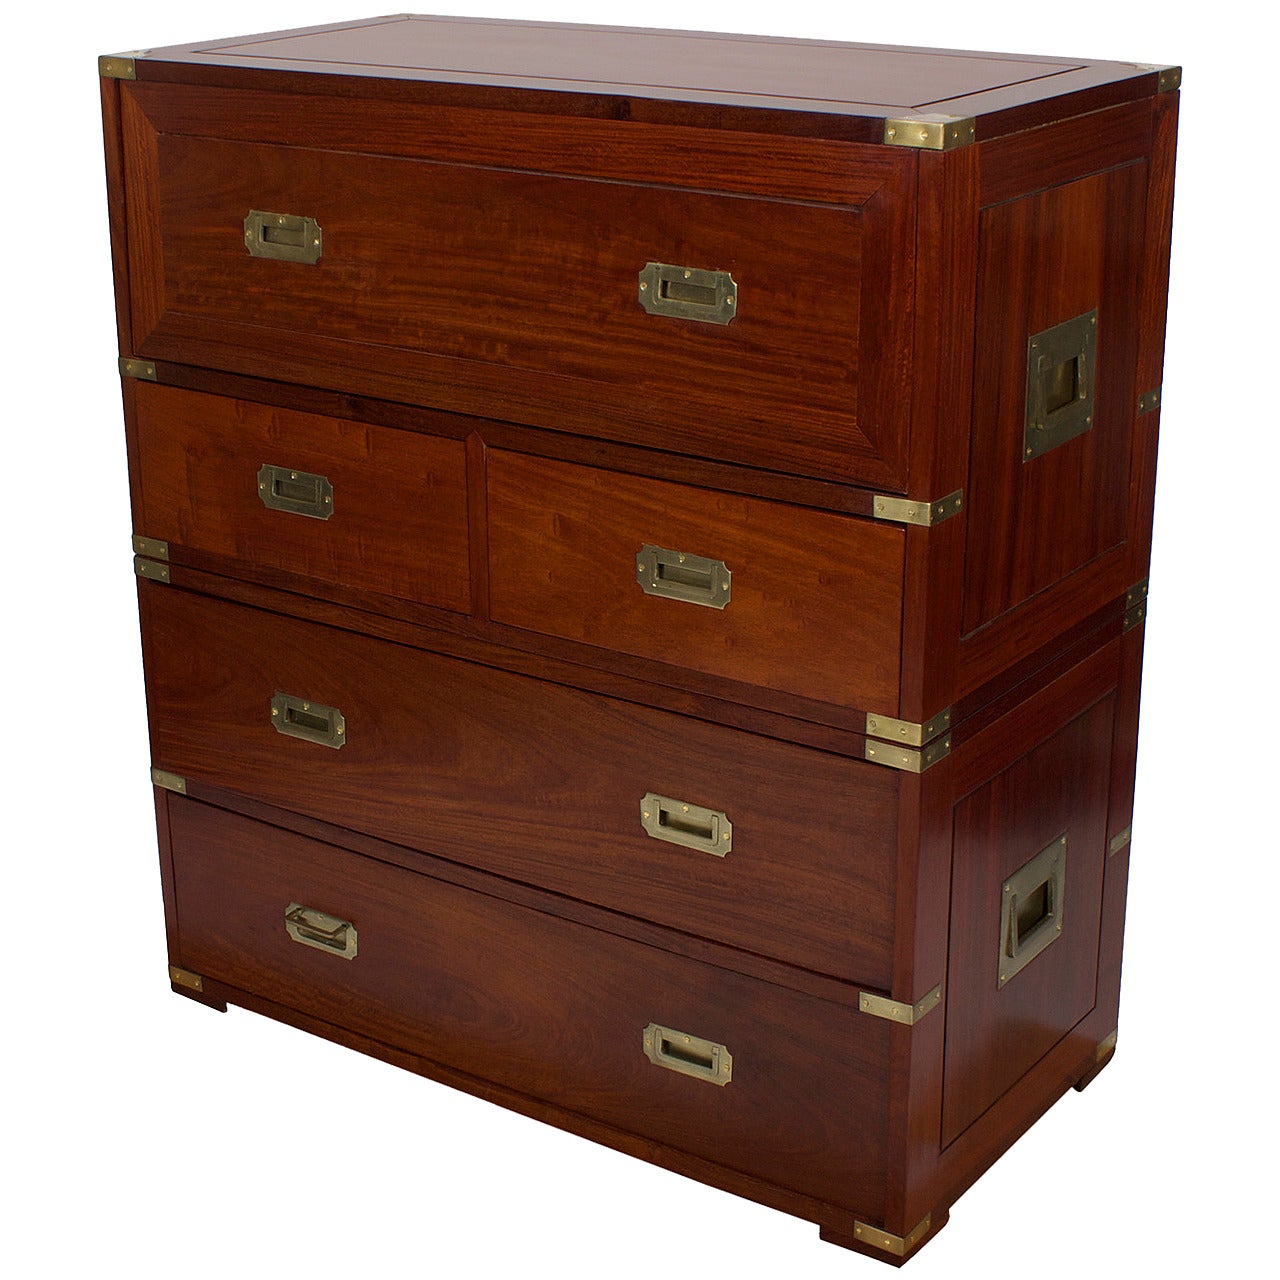 Modern Take on a Campaign Style Secretary Chest